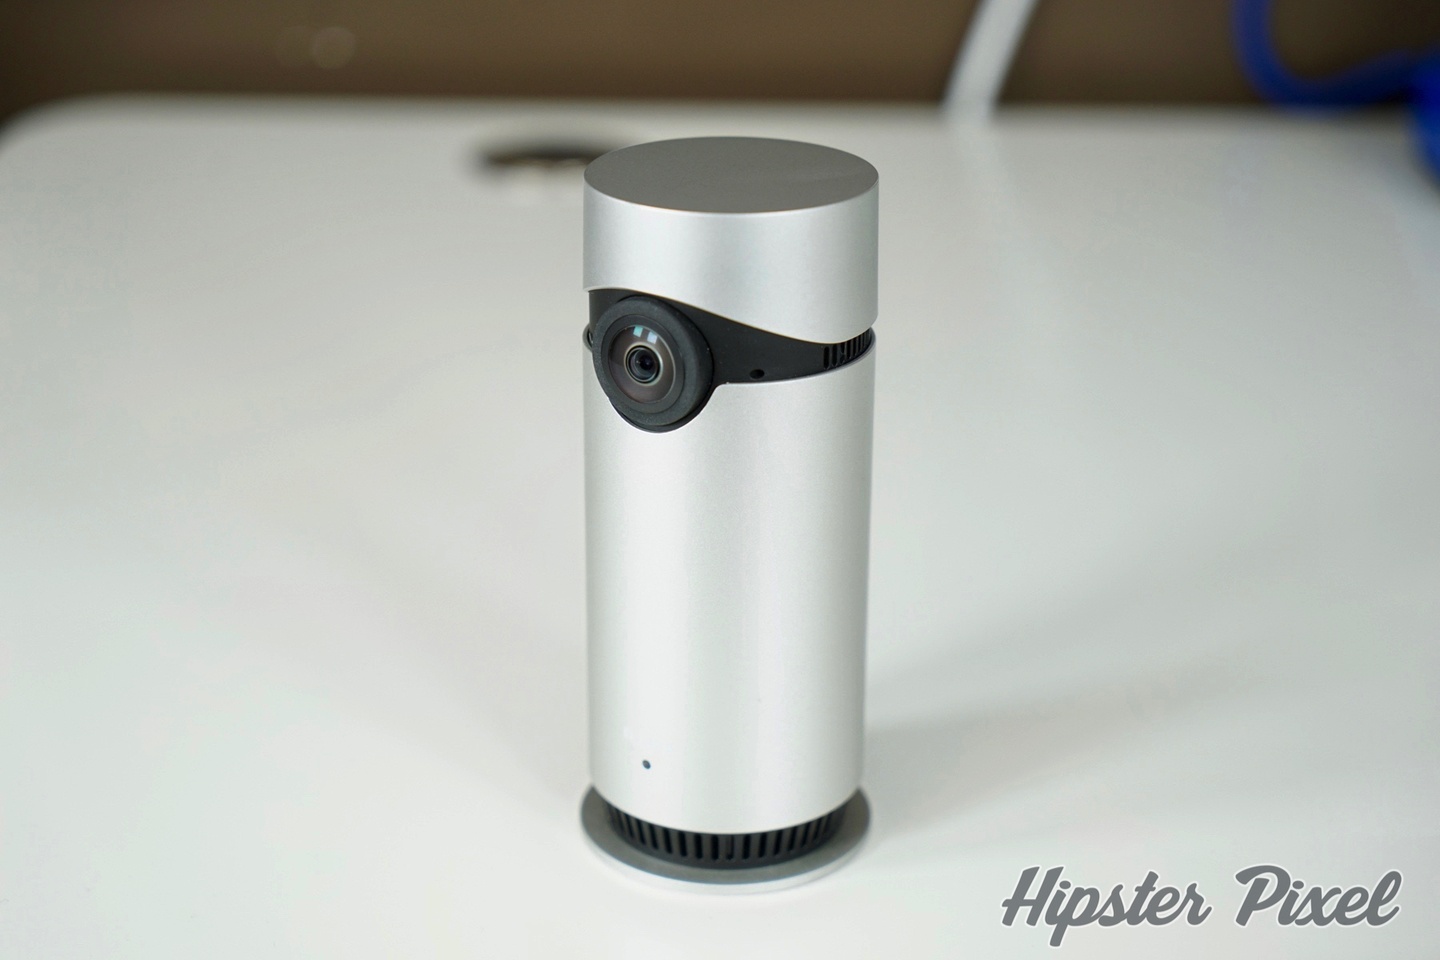 D-Link Omna 180 Cam HD Review